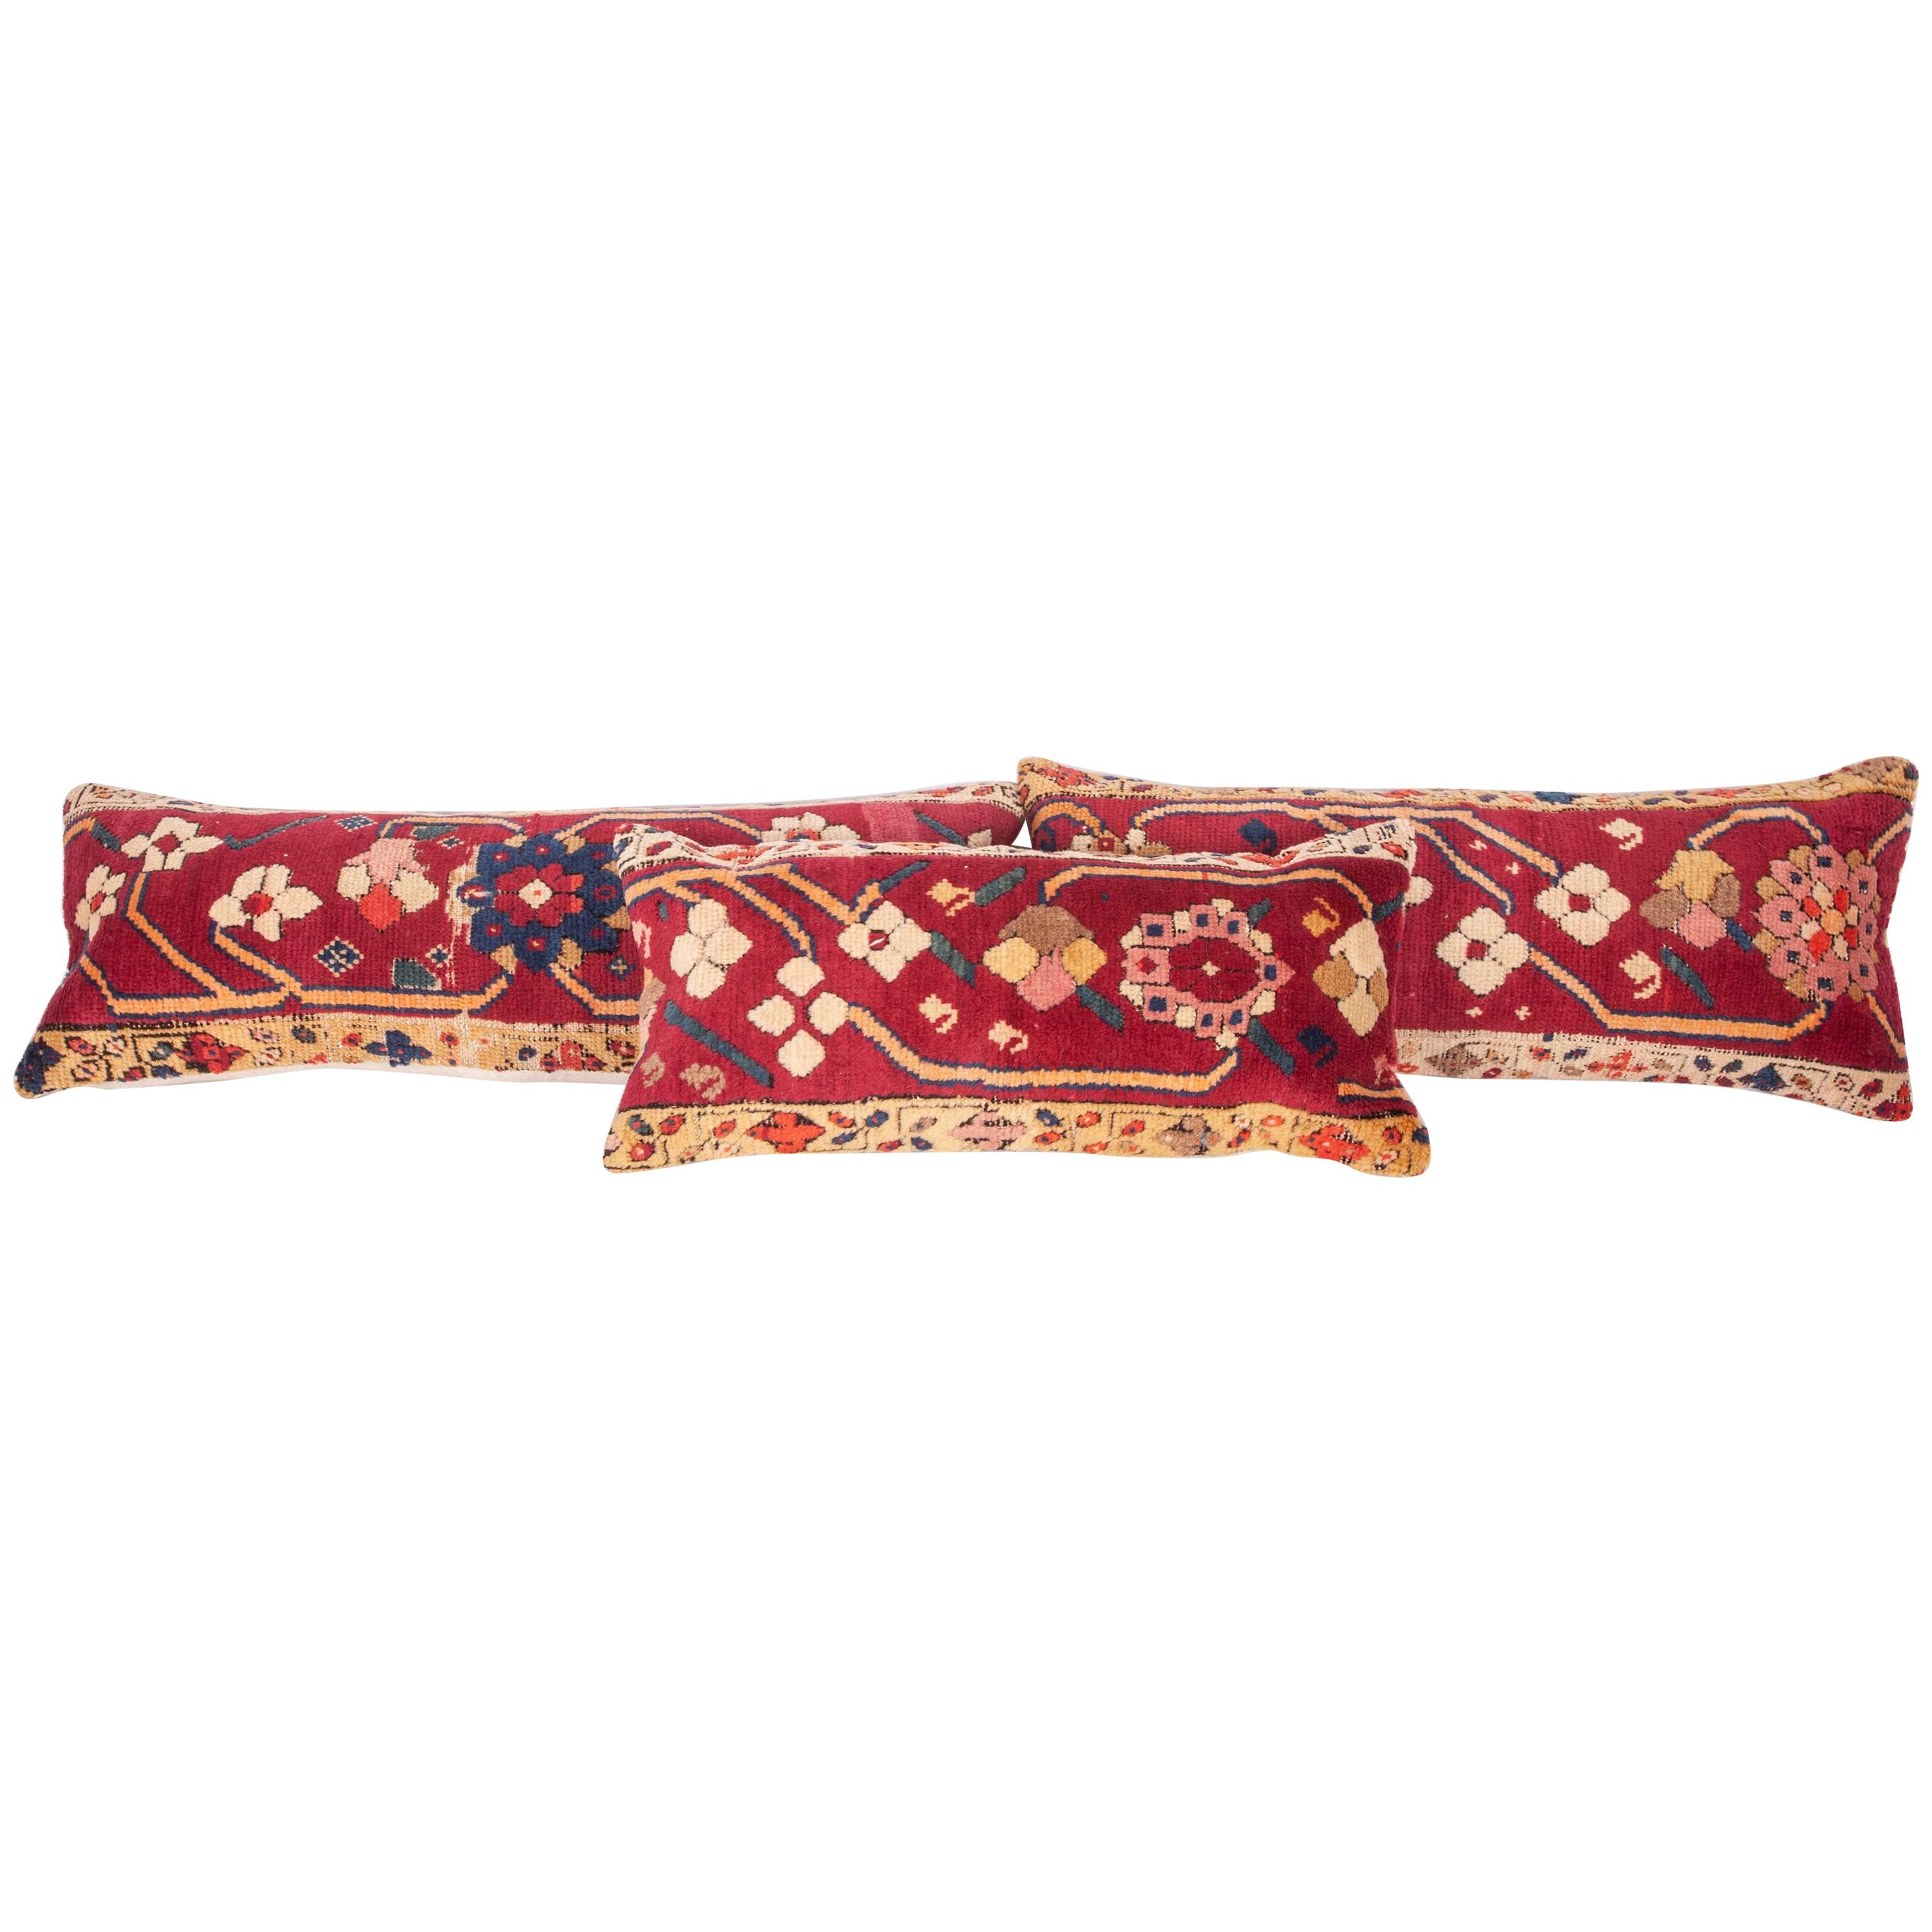 Antique Rug Pillow Cases Fashioned from Armenian Susha Rug, Late 19th Century